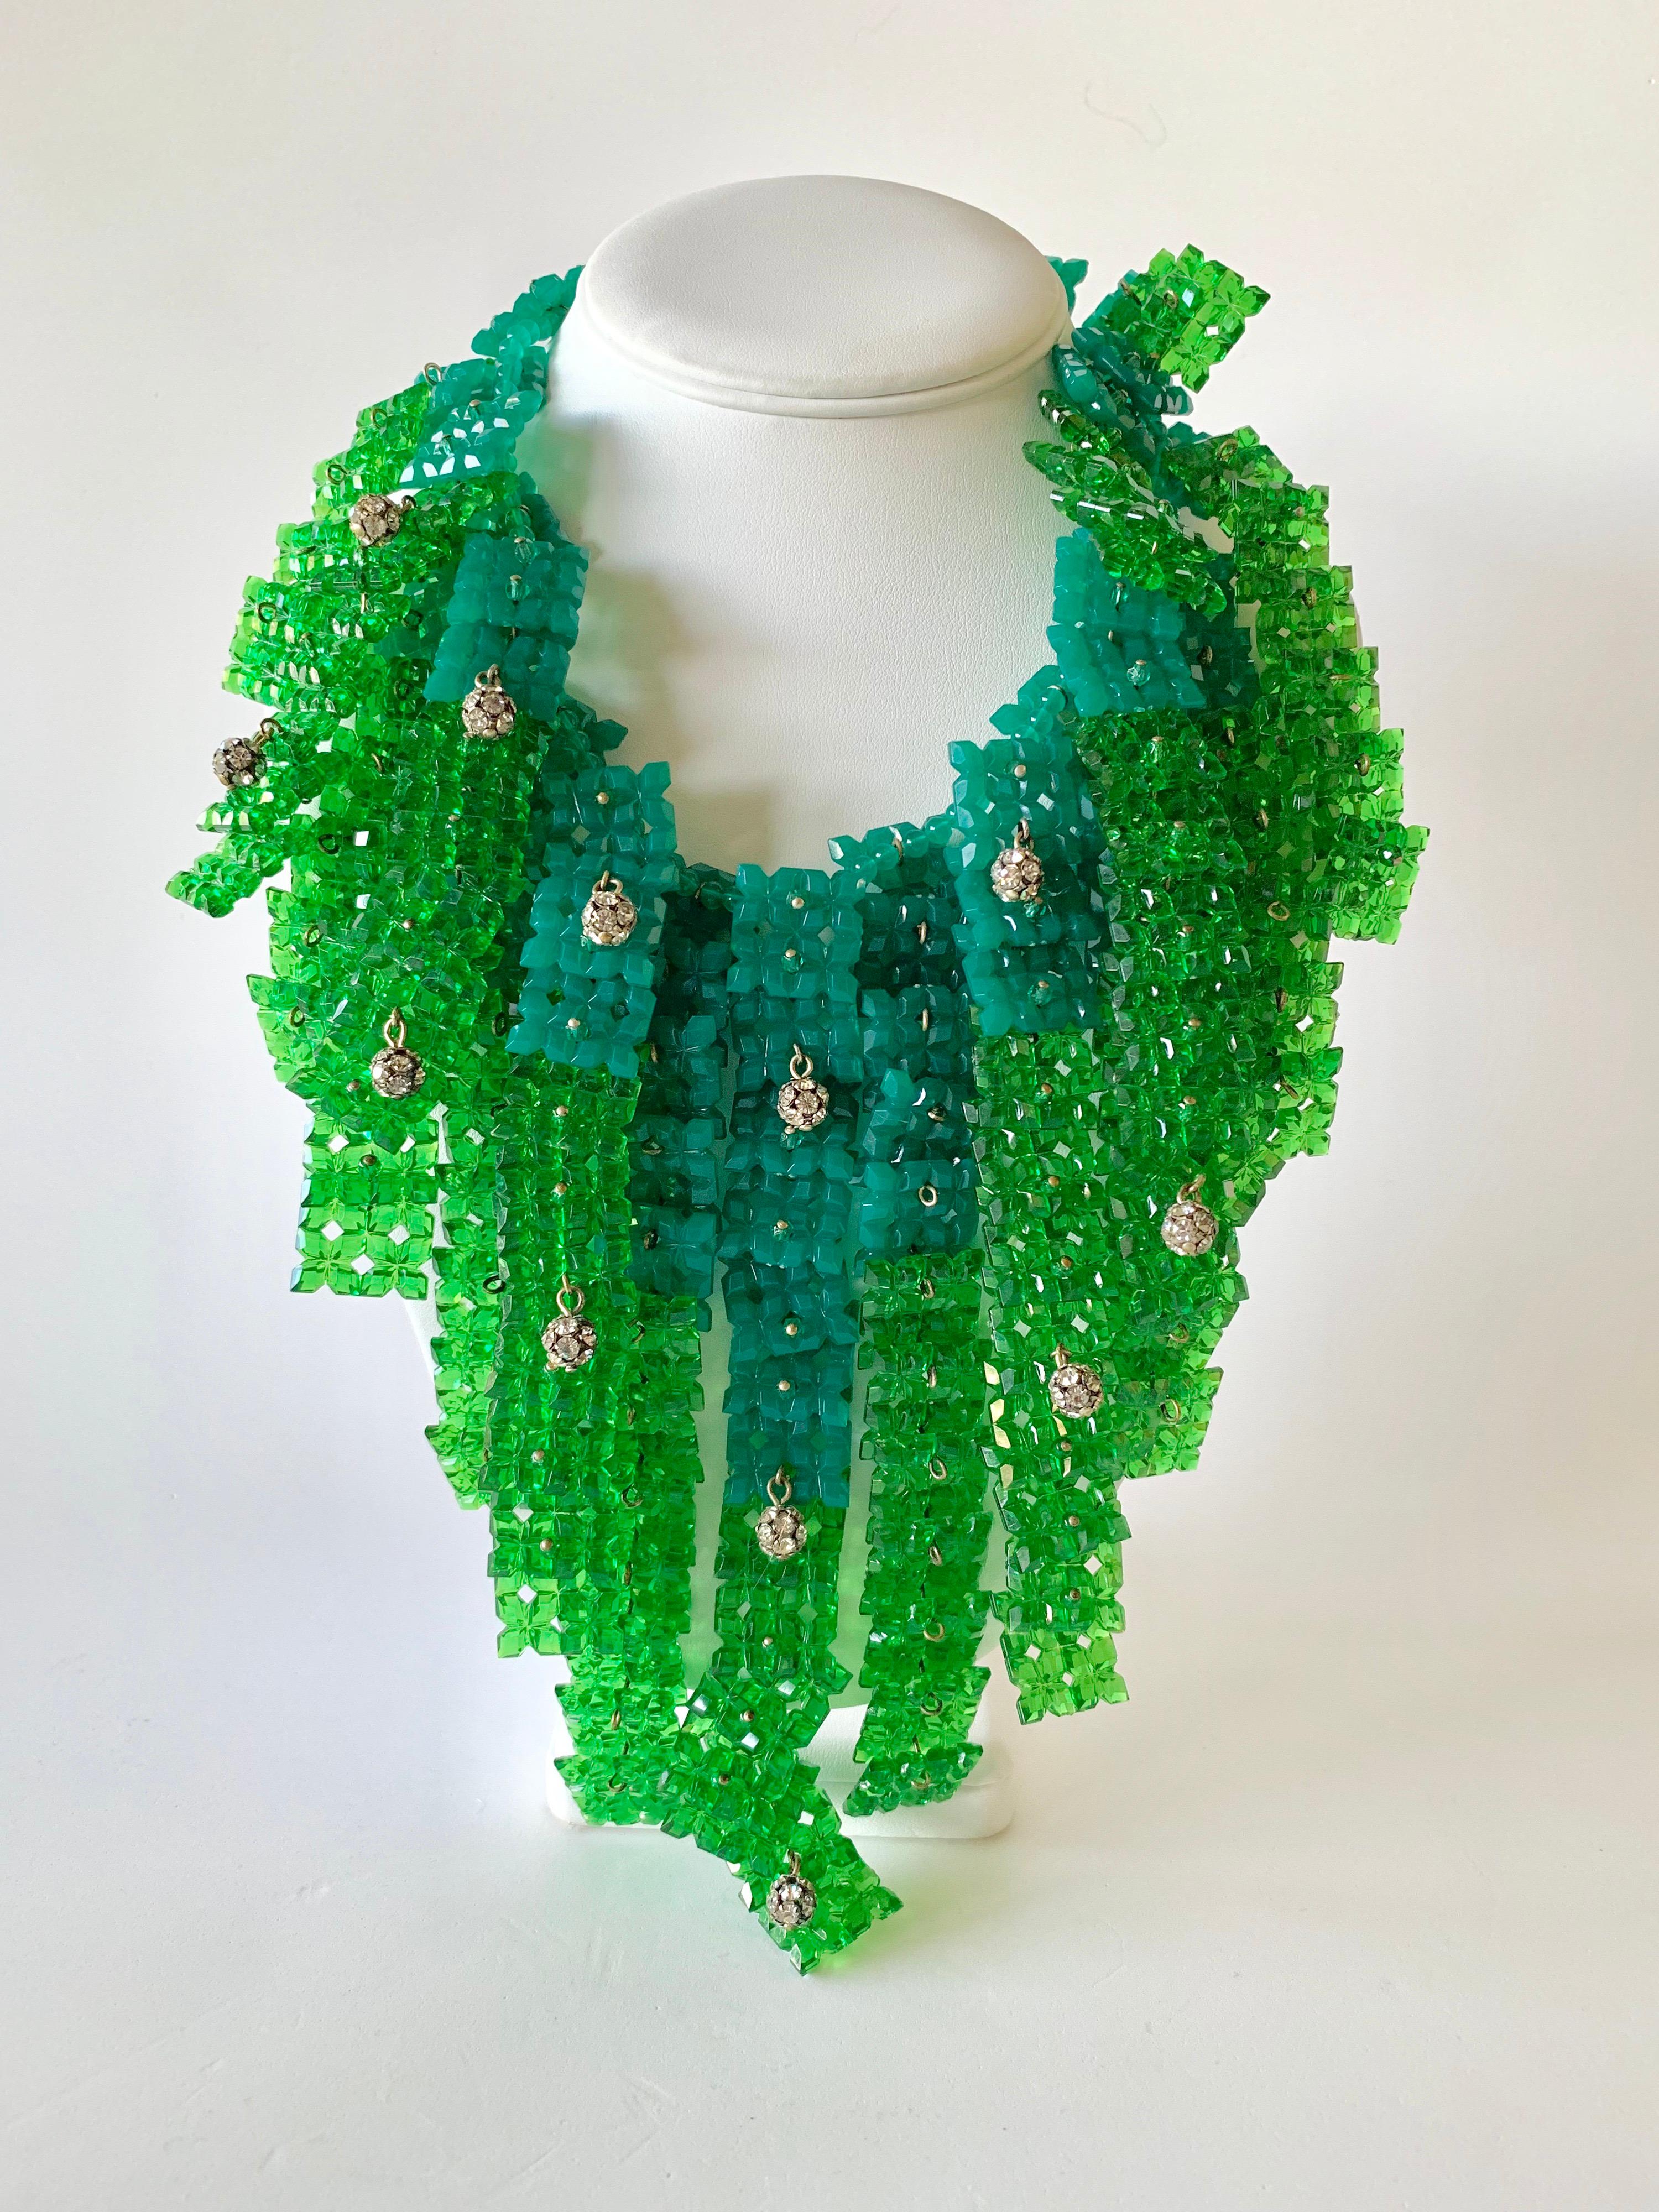 Bold Italian high fashion ombre green statement bib necklace made by Ornella Bijoux in Milan - the dramatic architectural bib necklace is comprised of women cascading strands of geometric textured acrylic segments creating an ombre effect. The